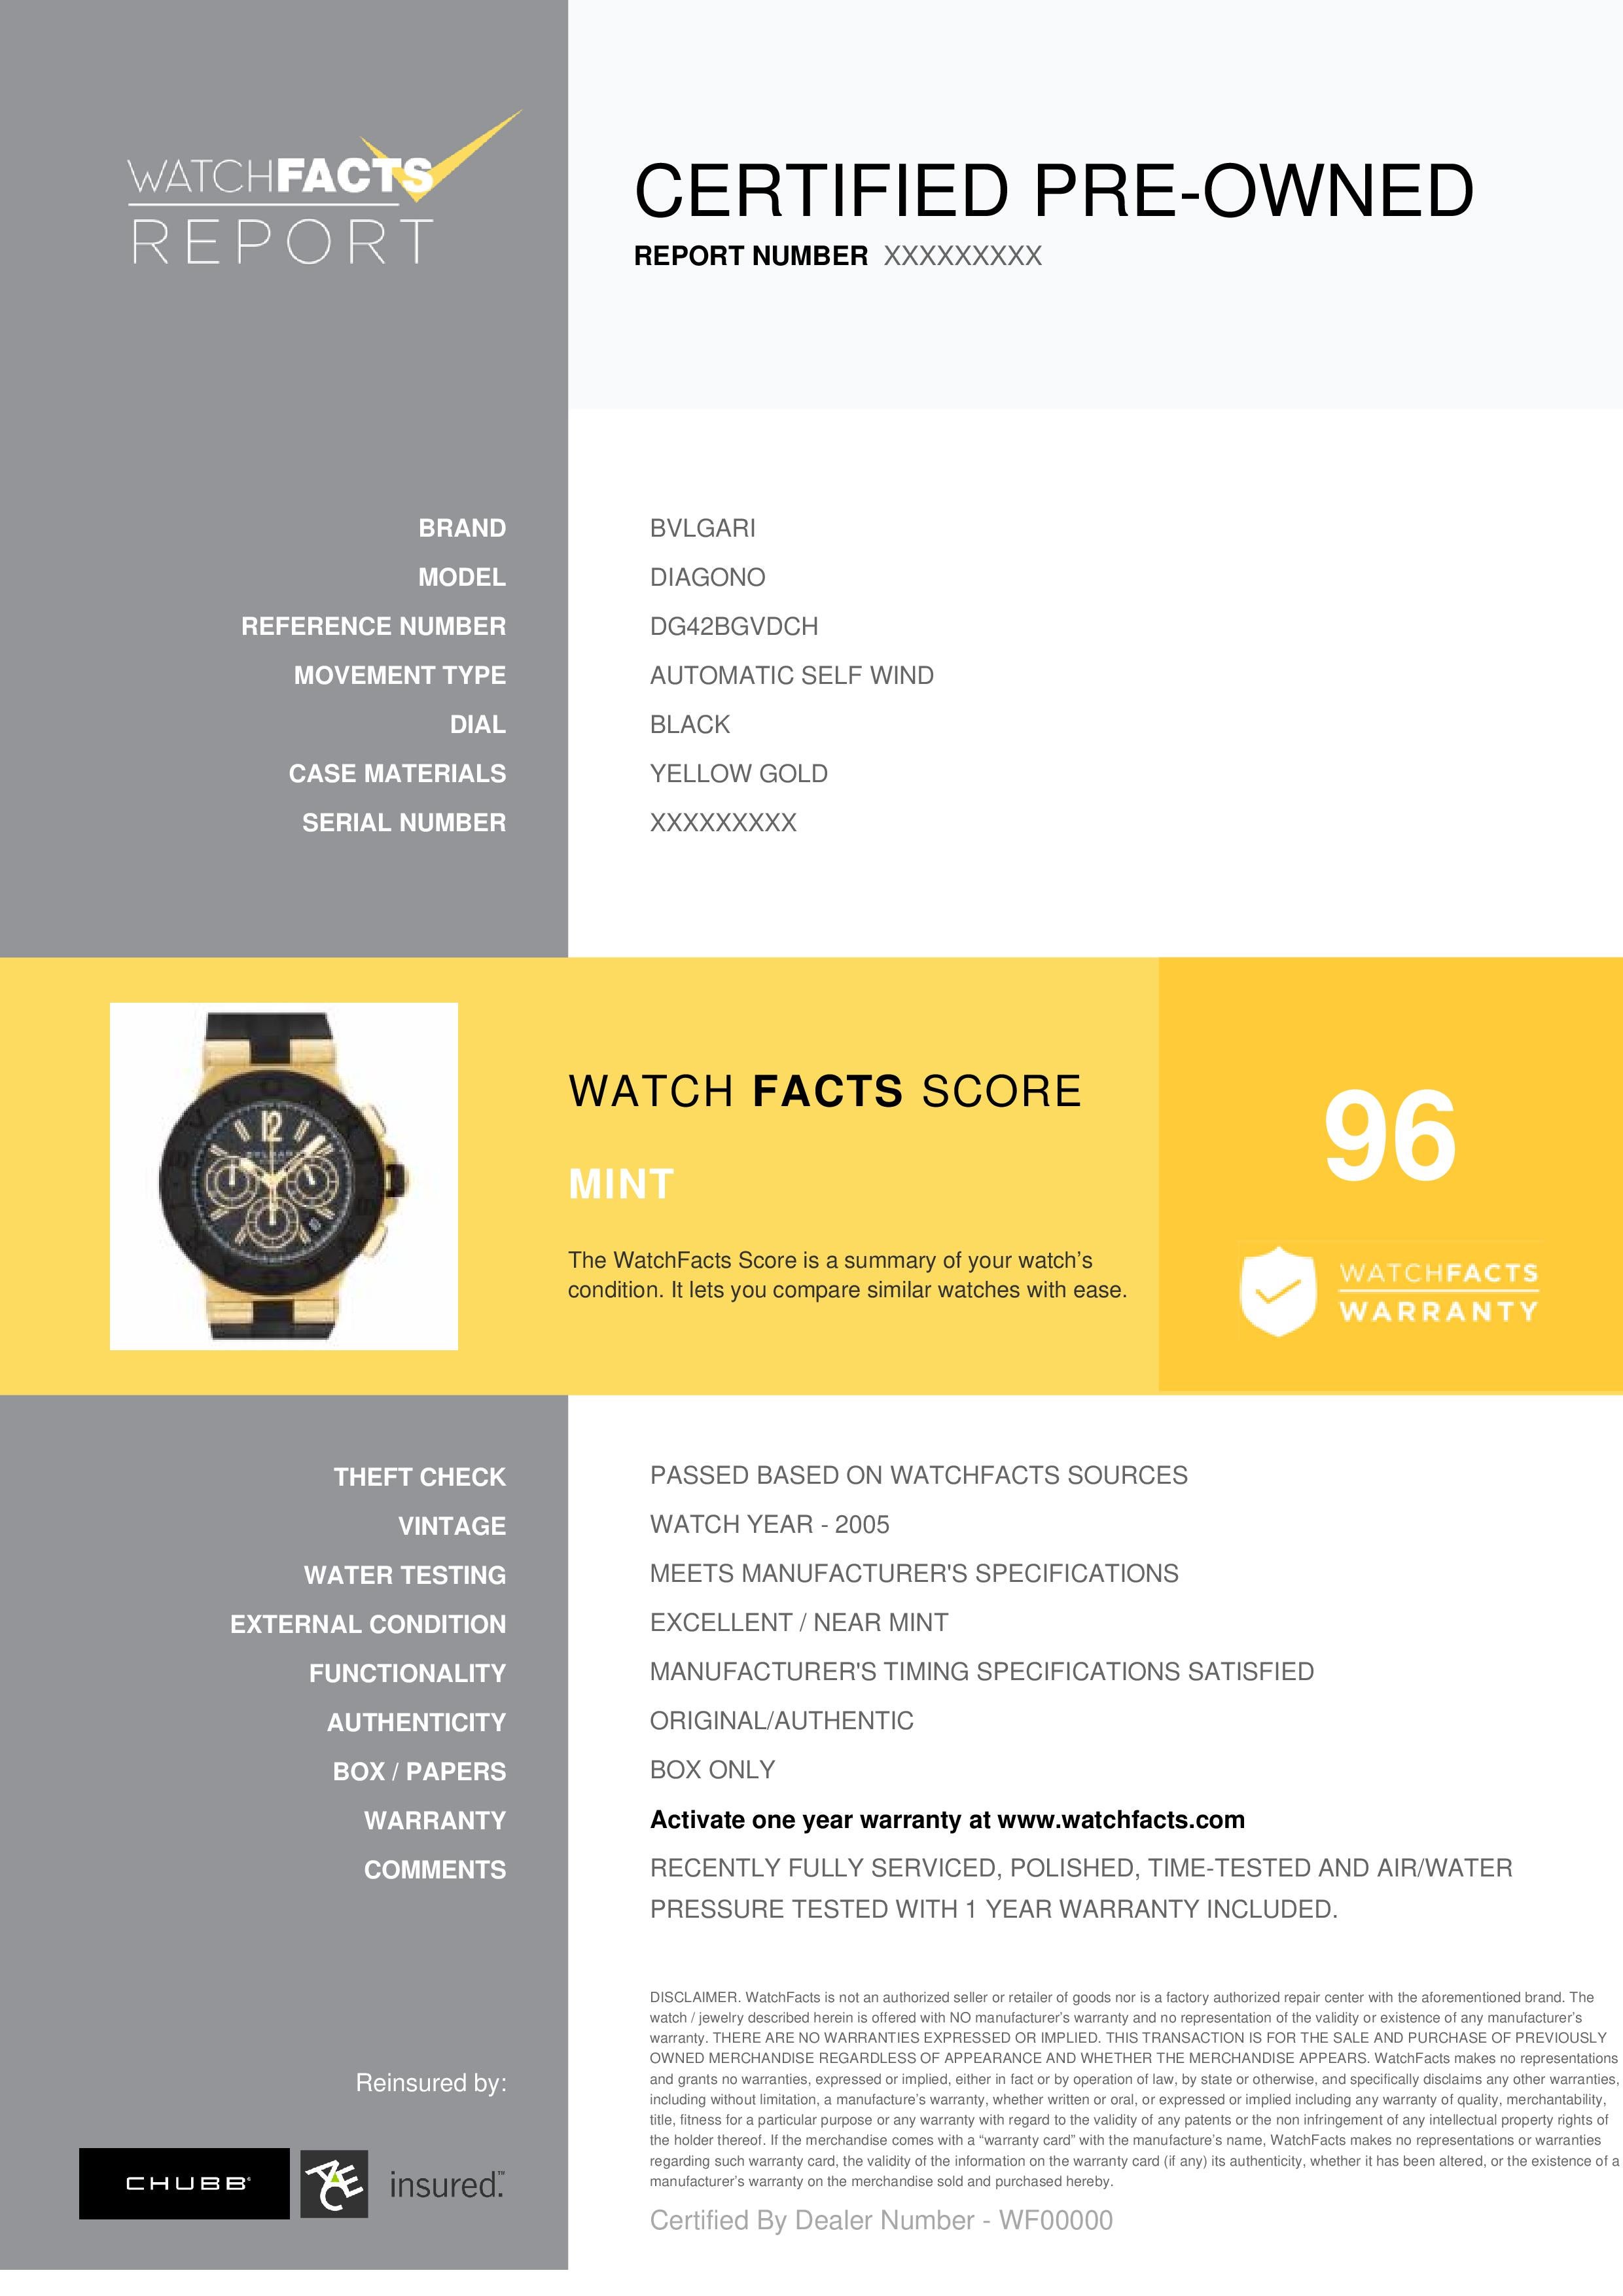 Bvlgari Diagono Reference #: DG42BGVDCH. Mens Automatic Self Wind Watch Yellow Gold Black 42 MM. Verified and Certified by WatchFacts. 1 year warranty offered by WatchFacts.
